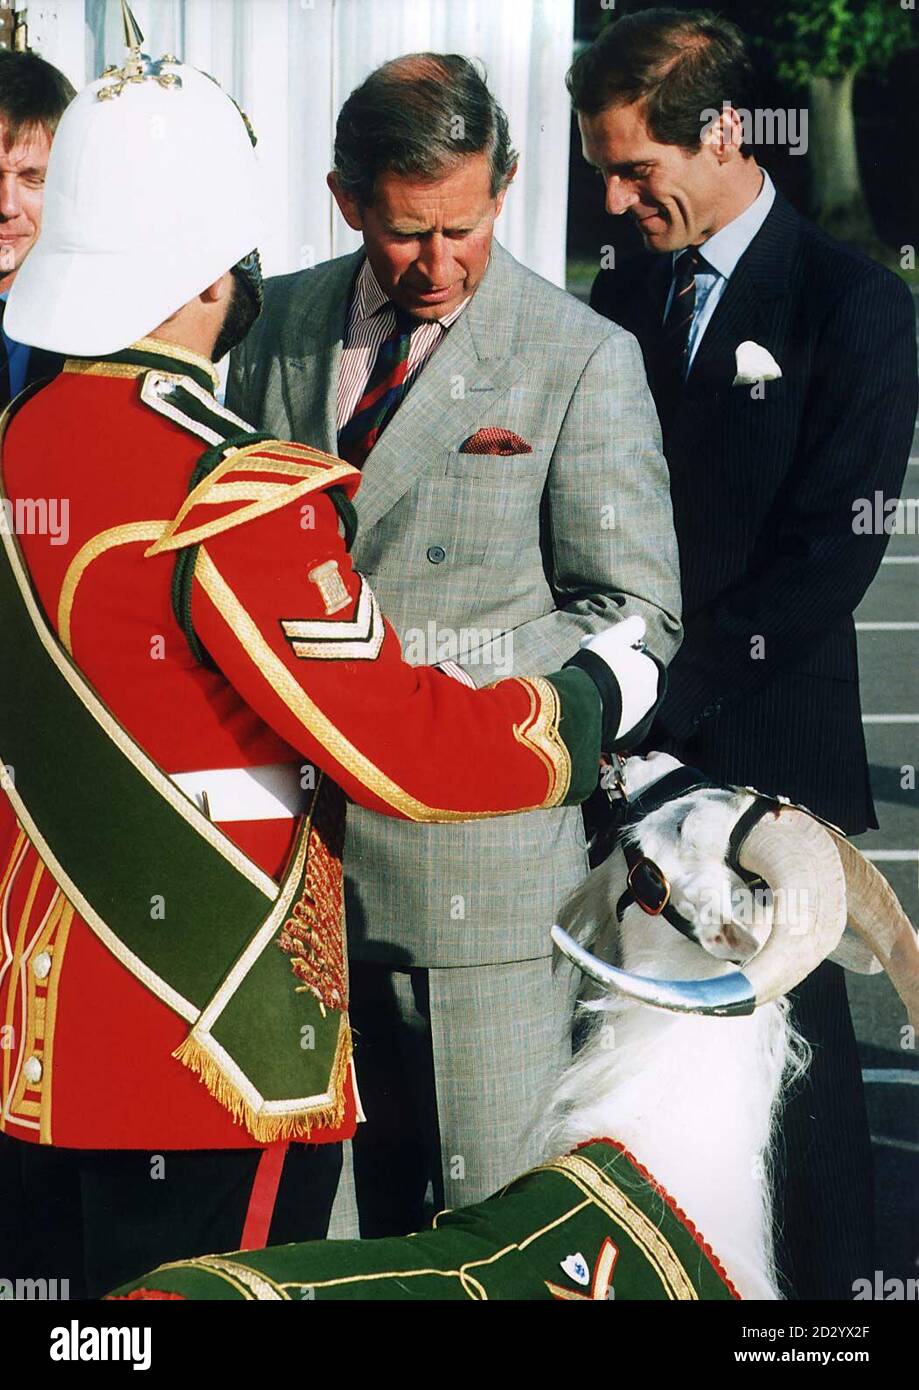 The Prince of Wales meets L/Cpl Shankin the goat mascot of the 2nd Battalion Royal Wales Regiment (Territorial Battalion) with handler Goat Major Cpl Dave Joseph BEM, when the Prince attended the Welsh Development Agency dinner for investors in Cardiff this evening (Friday). PA Photos (Rota Pic) Stock Photo